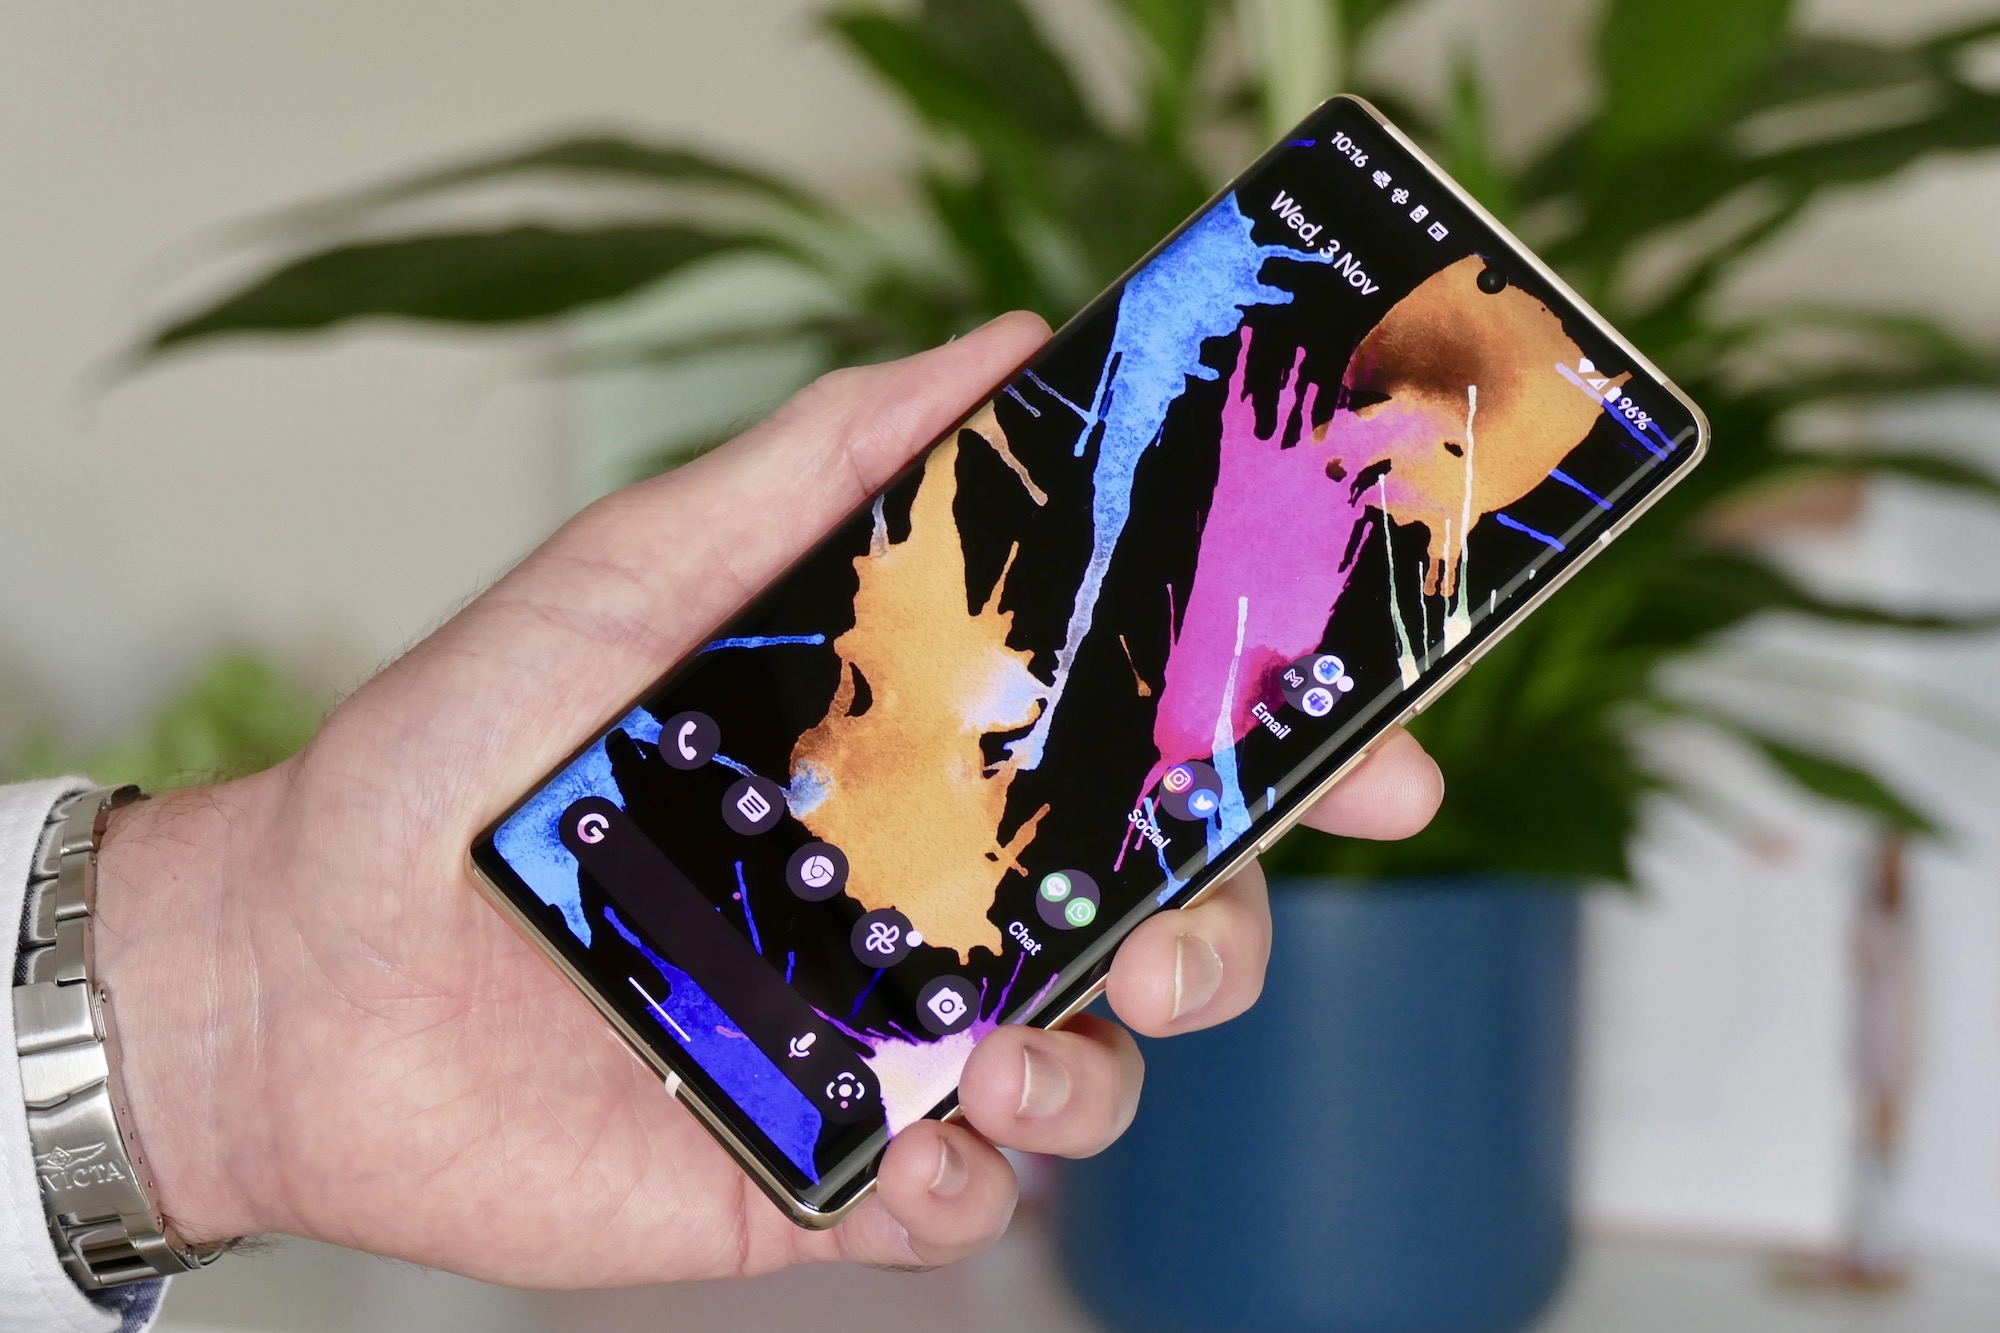 Pixel 6 wallpapers leak w/ colorful plant and flower theme - 9to5Google